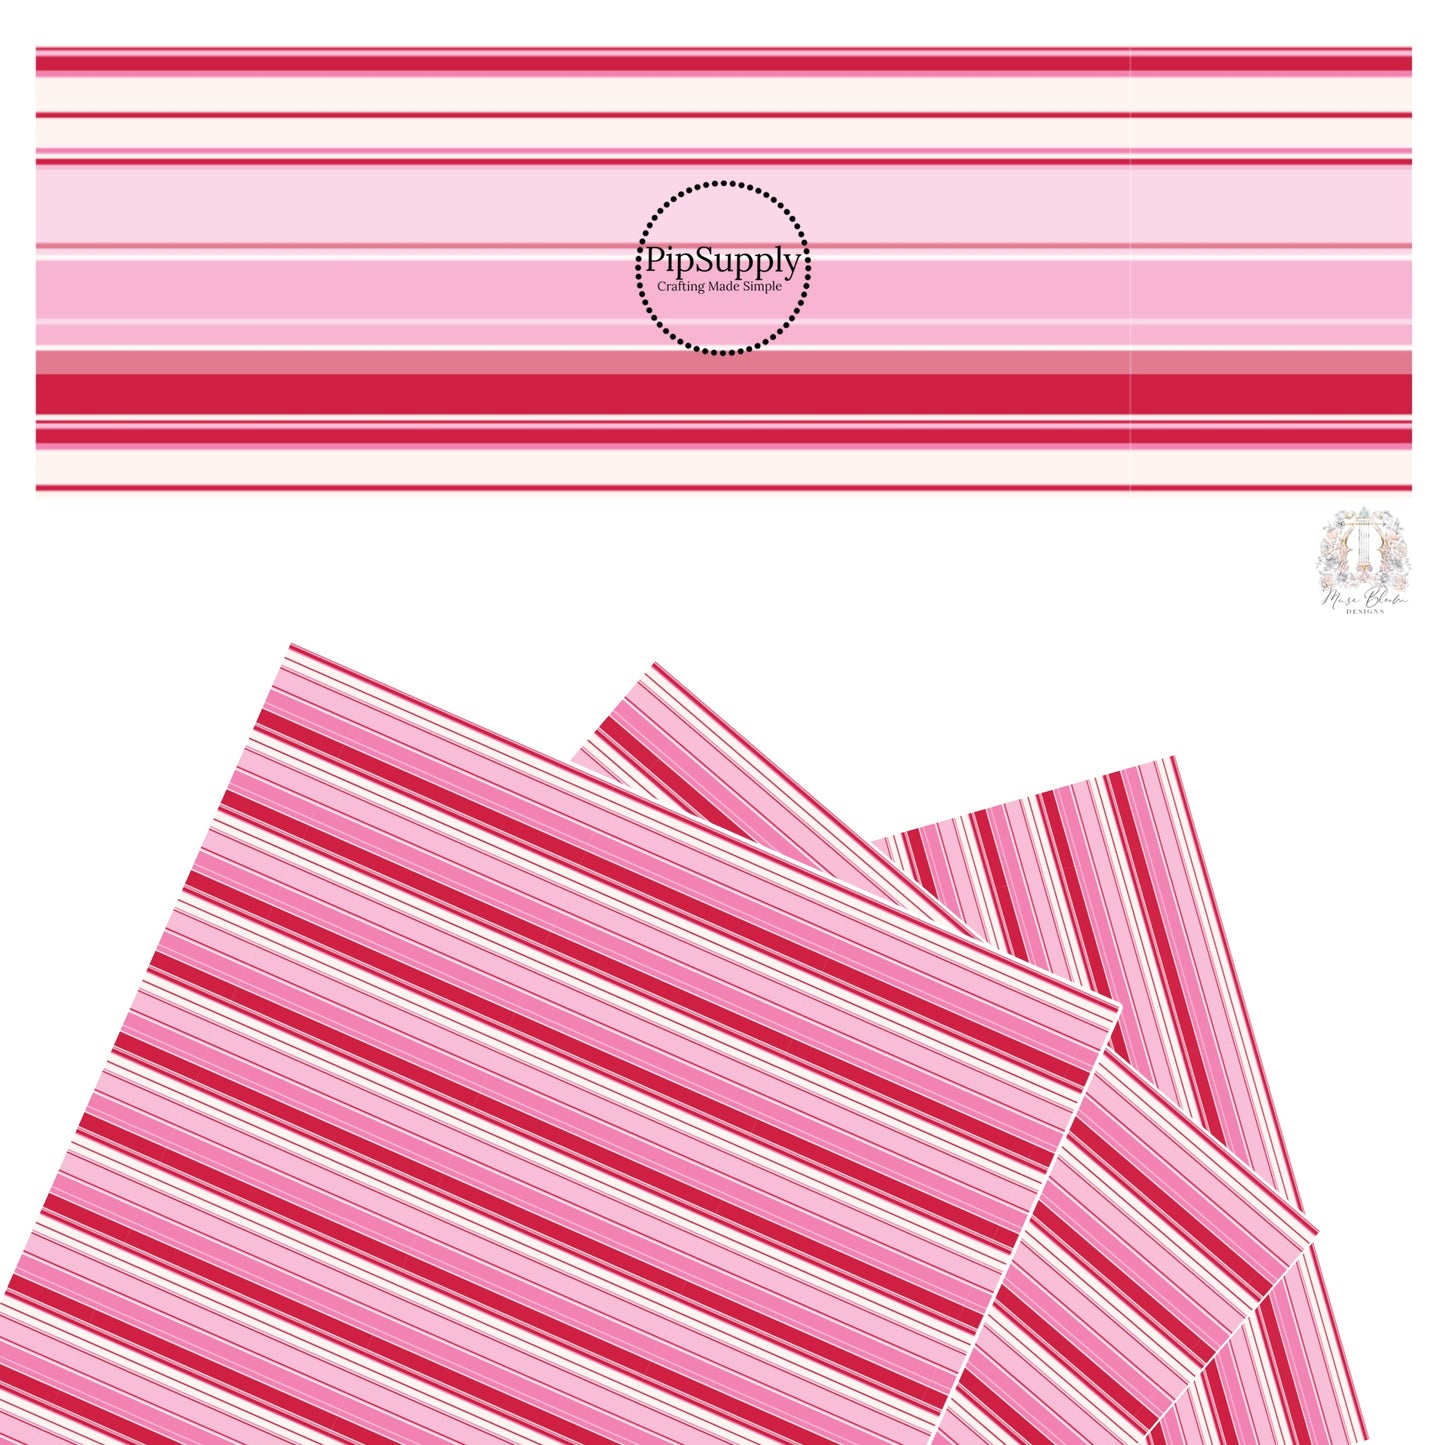 These Valentine's pattern themed faux leather sheets contain the following design elements: rows of red and pink strips on white. Our CPSIA compliant faux leather sheets or rolls can be used for all types of crafting projects.